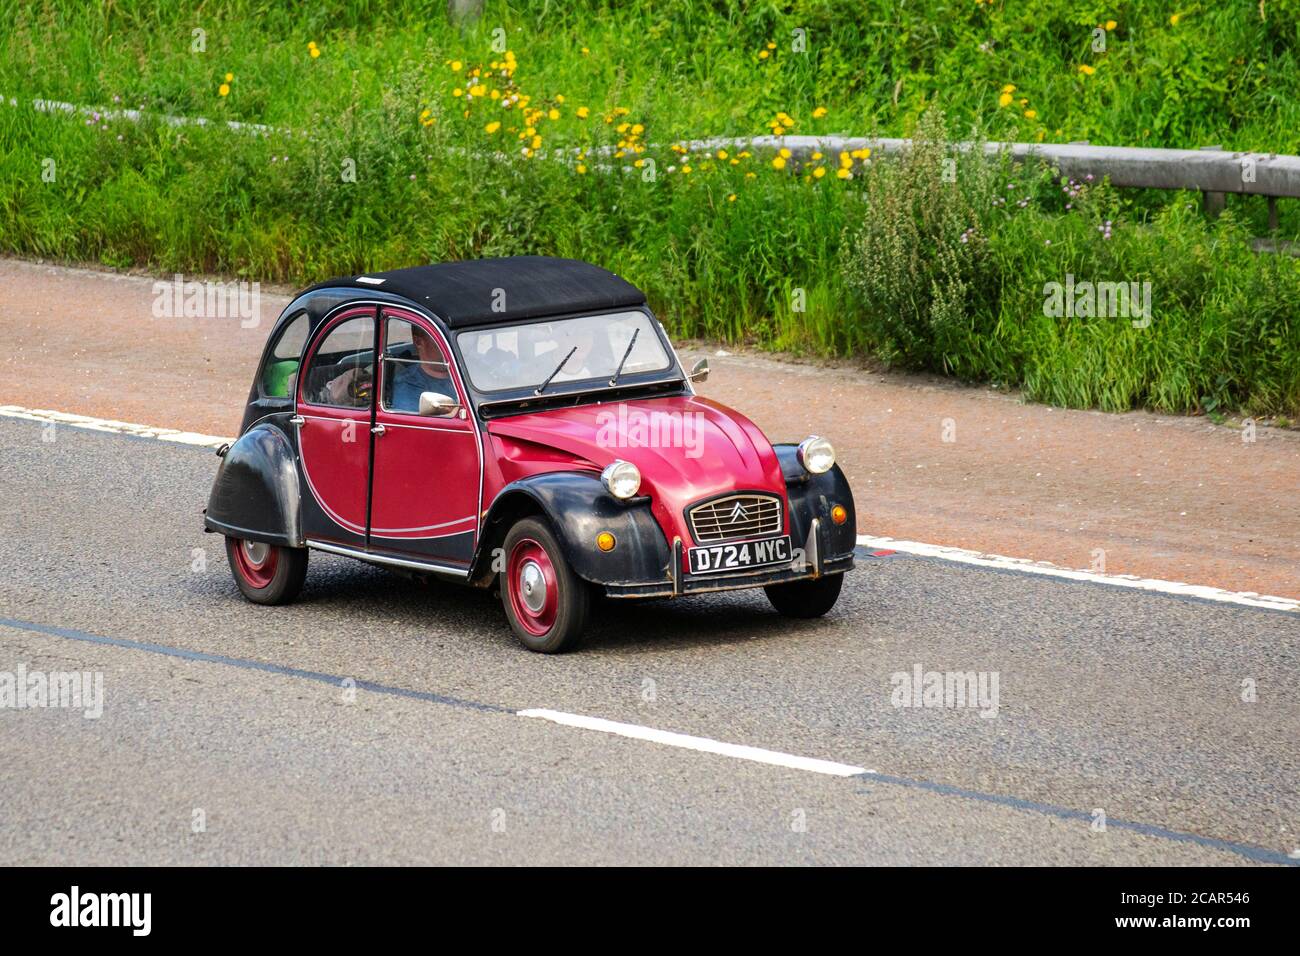 1987 80s black maroon Citroën 2 CV6; Vehicular traffic moving vehicles, air-cooled front-engine, small compact city car, front-wheel-drive economy car driving vehicle on UK roads, classic French motors, motoring on the M6 motorway highway network. Stock Photo